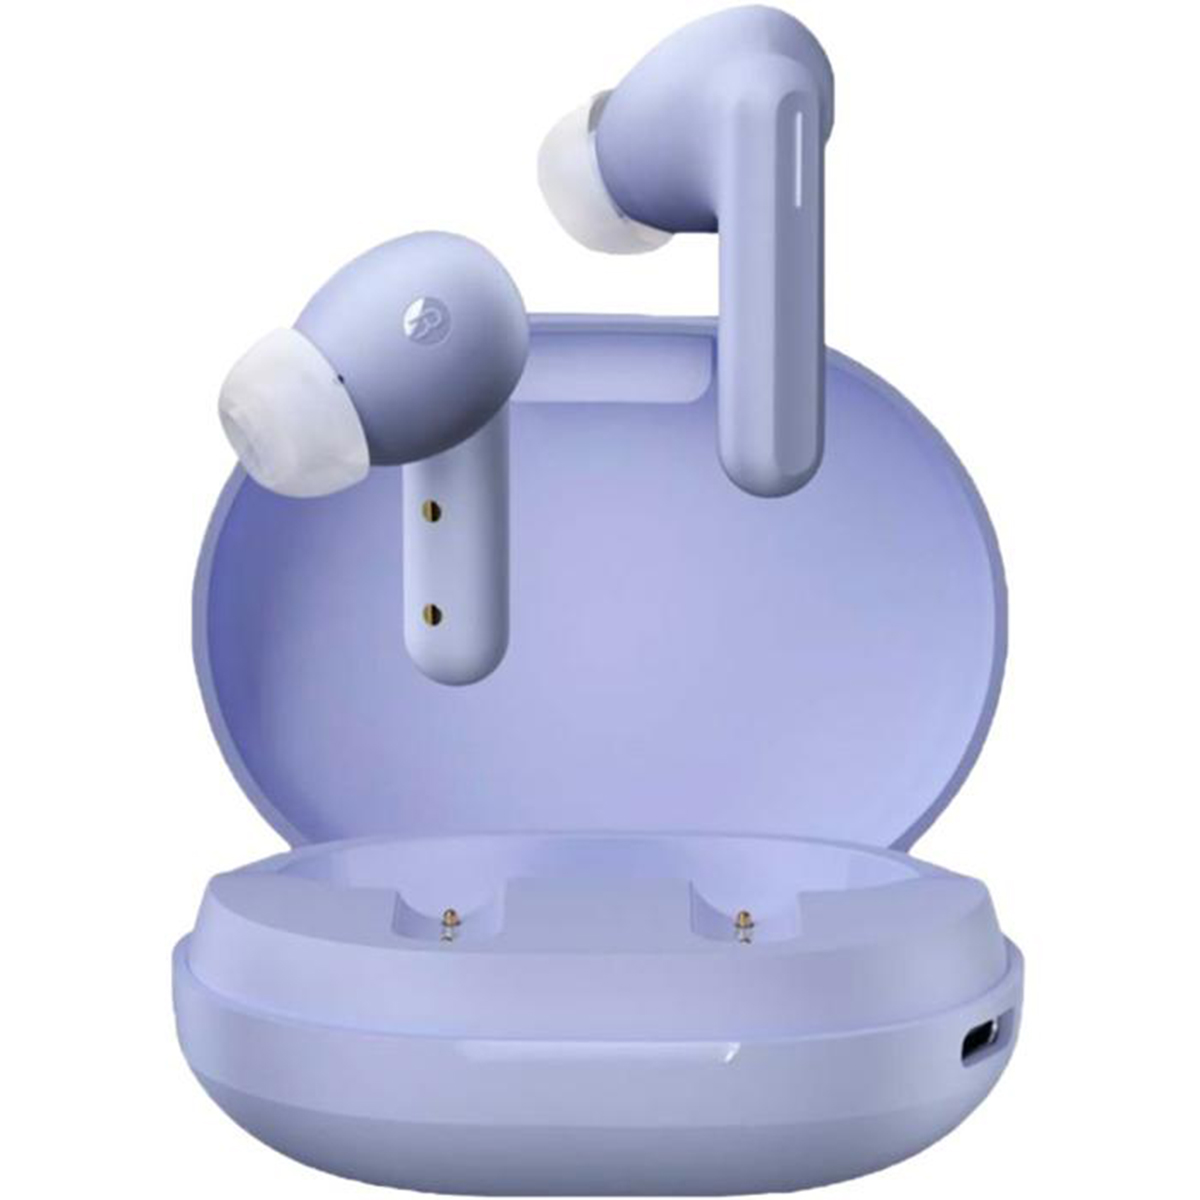 Casti Bluetooth In-ear Haylou Gt7 Neo, Violet